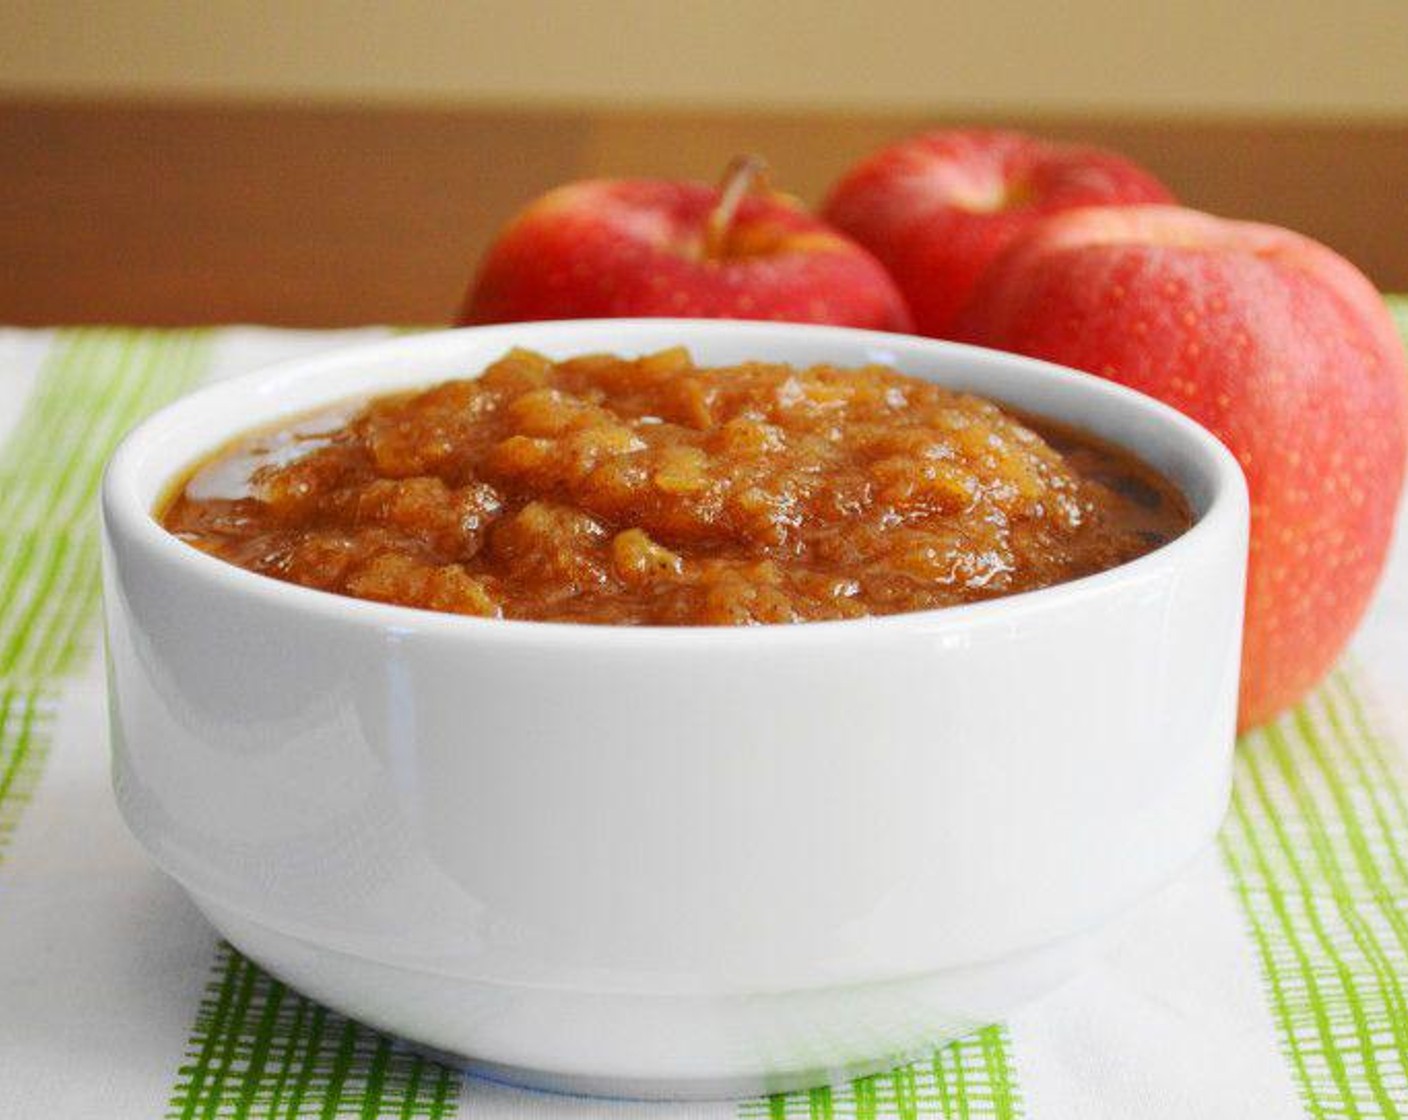 step 3 When it's done, turn off the slow cooker and let the applesauce cool for 30 minutes. Then just seal it in a container, refrigerate it, and use as needed for snacks, pancakes, and so many other recipes! Enjoy!